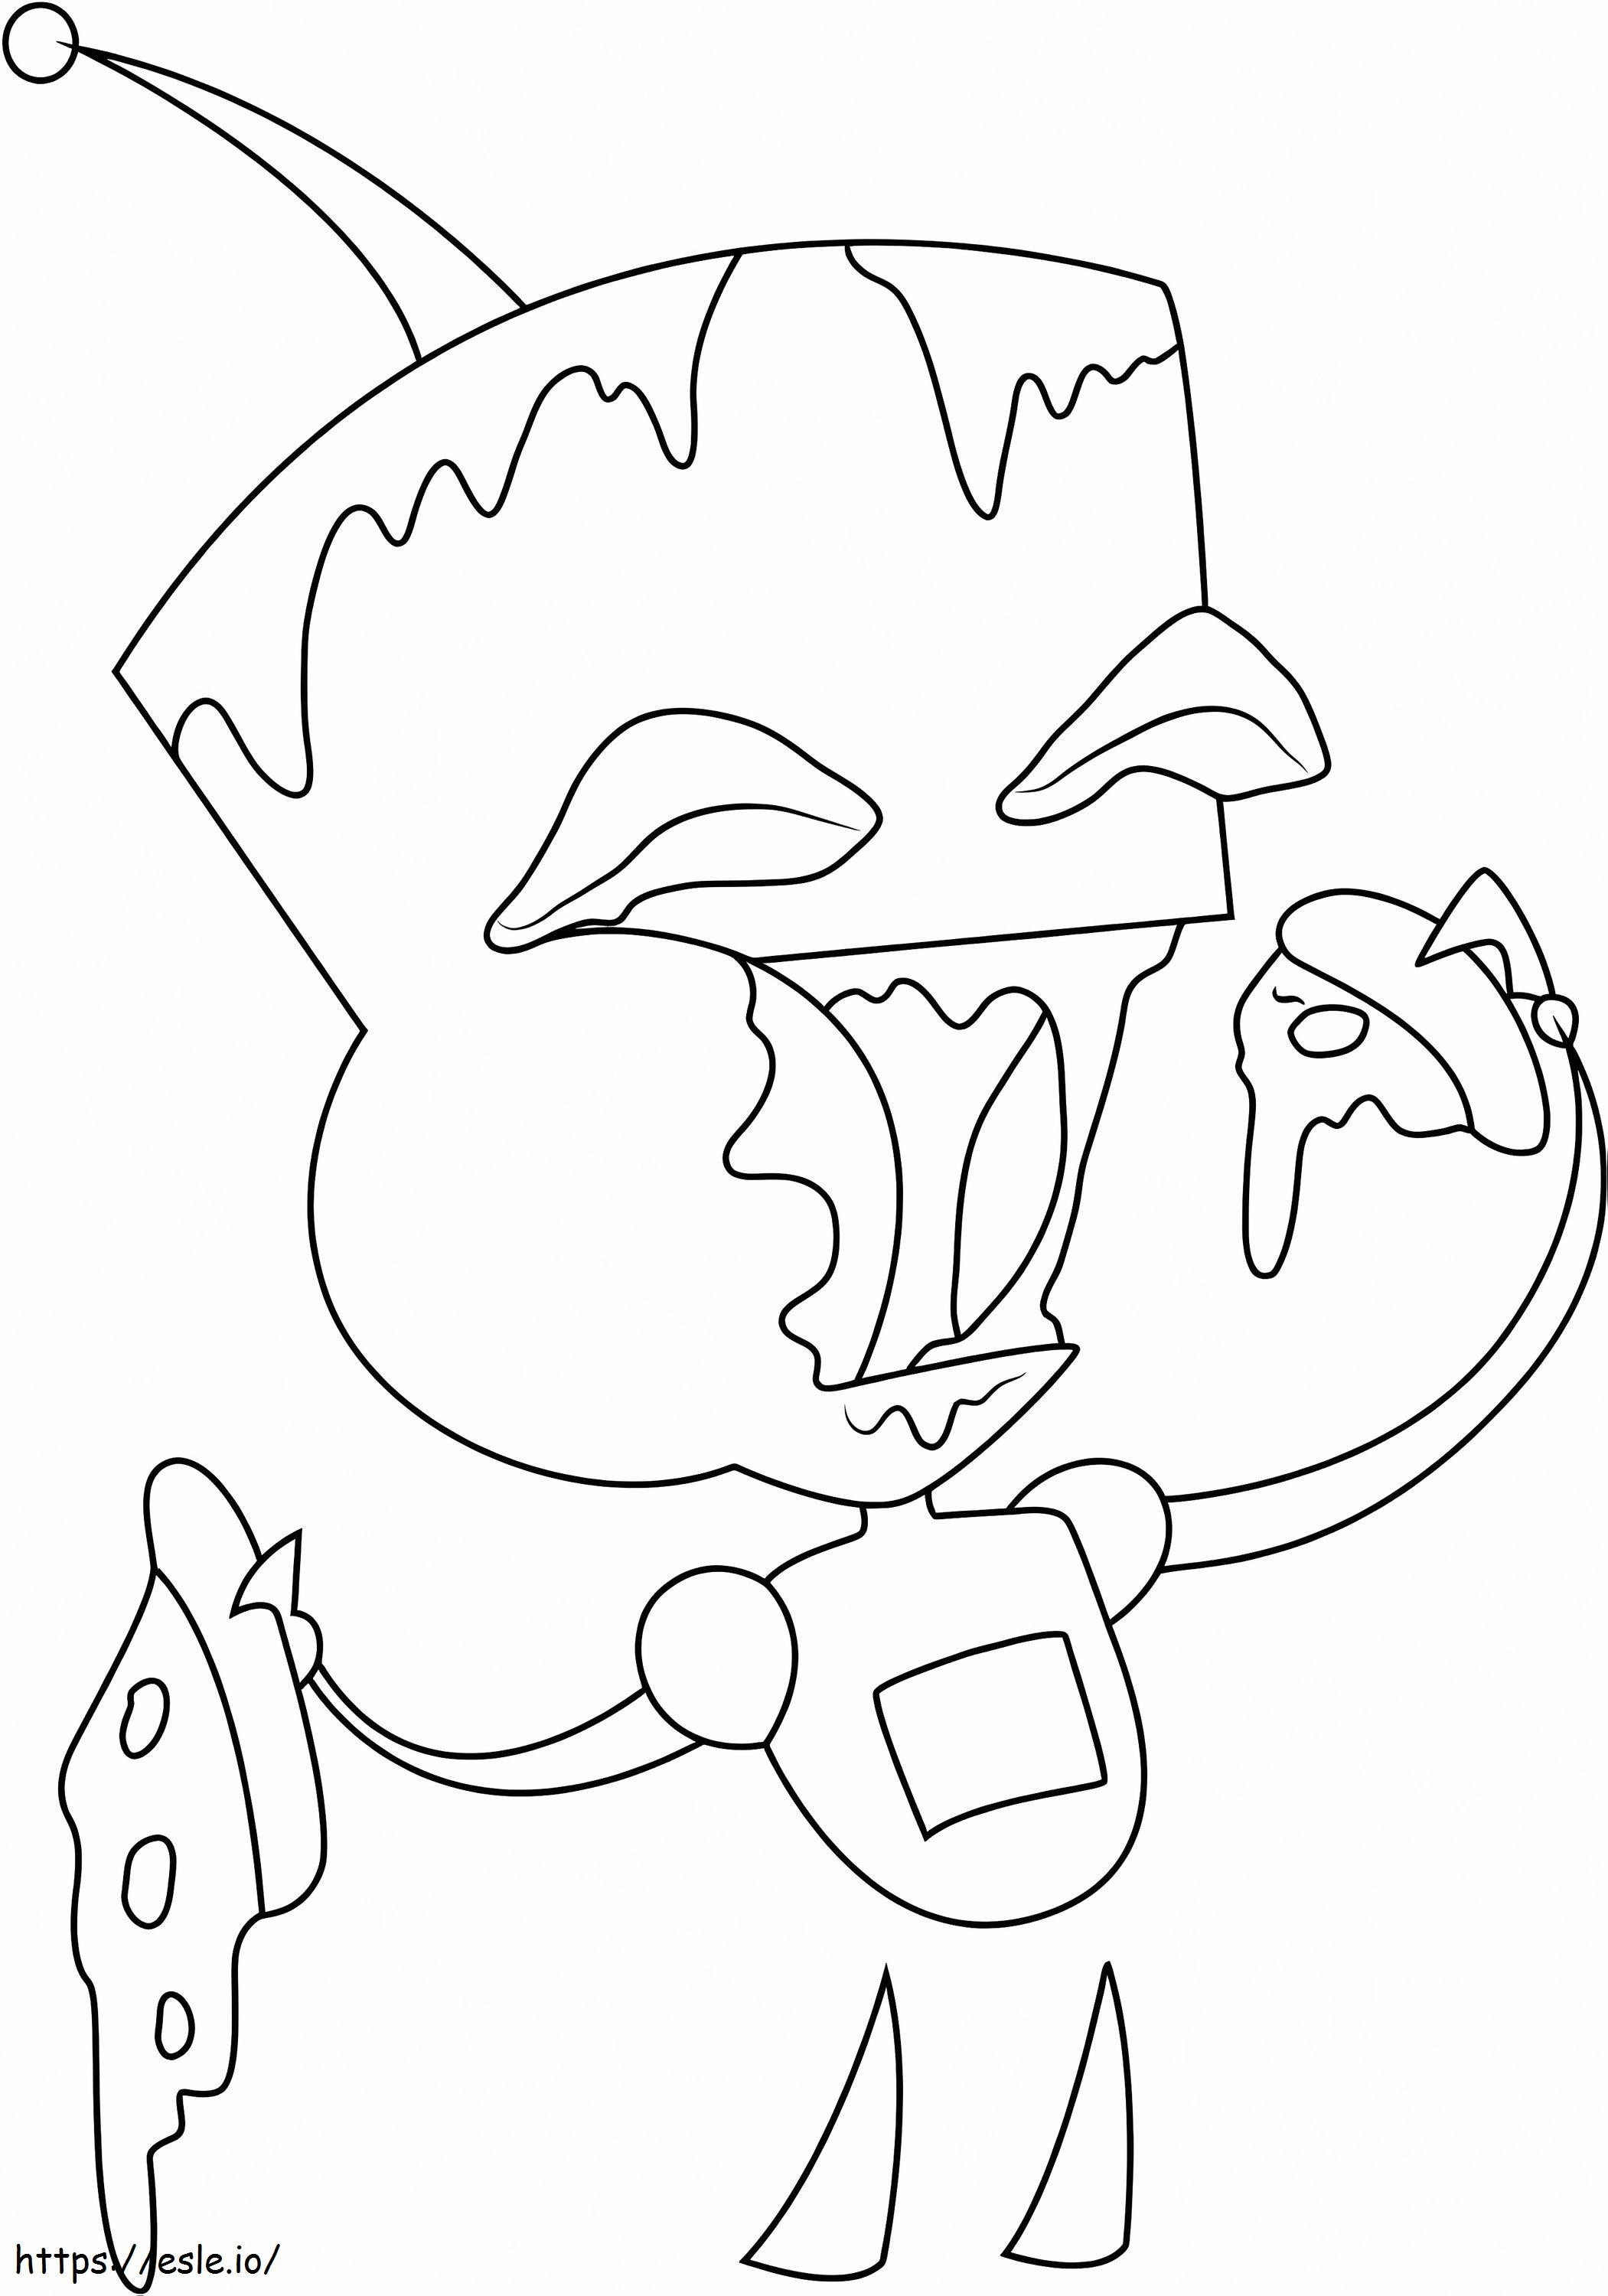 Gir Eating Pizza coloring page